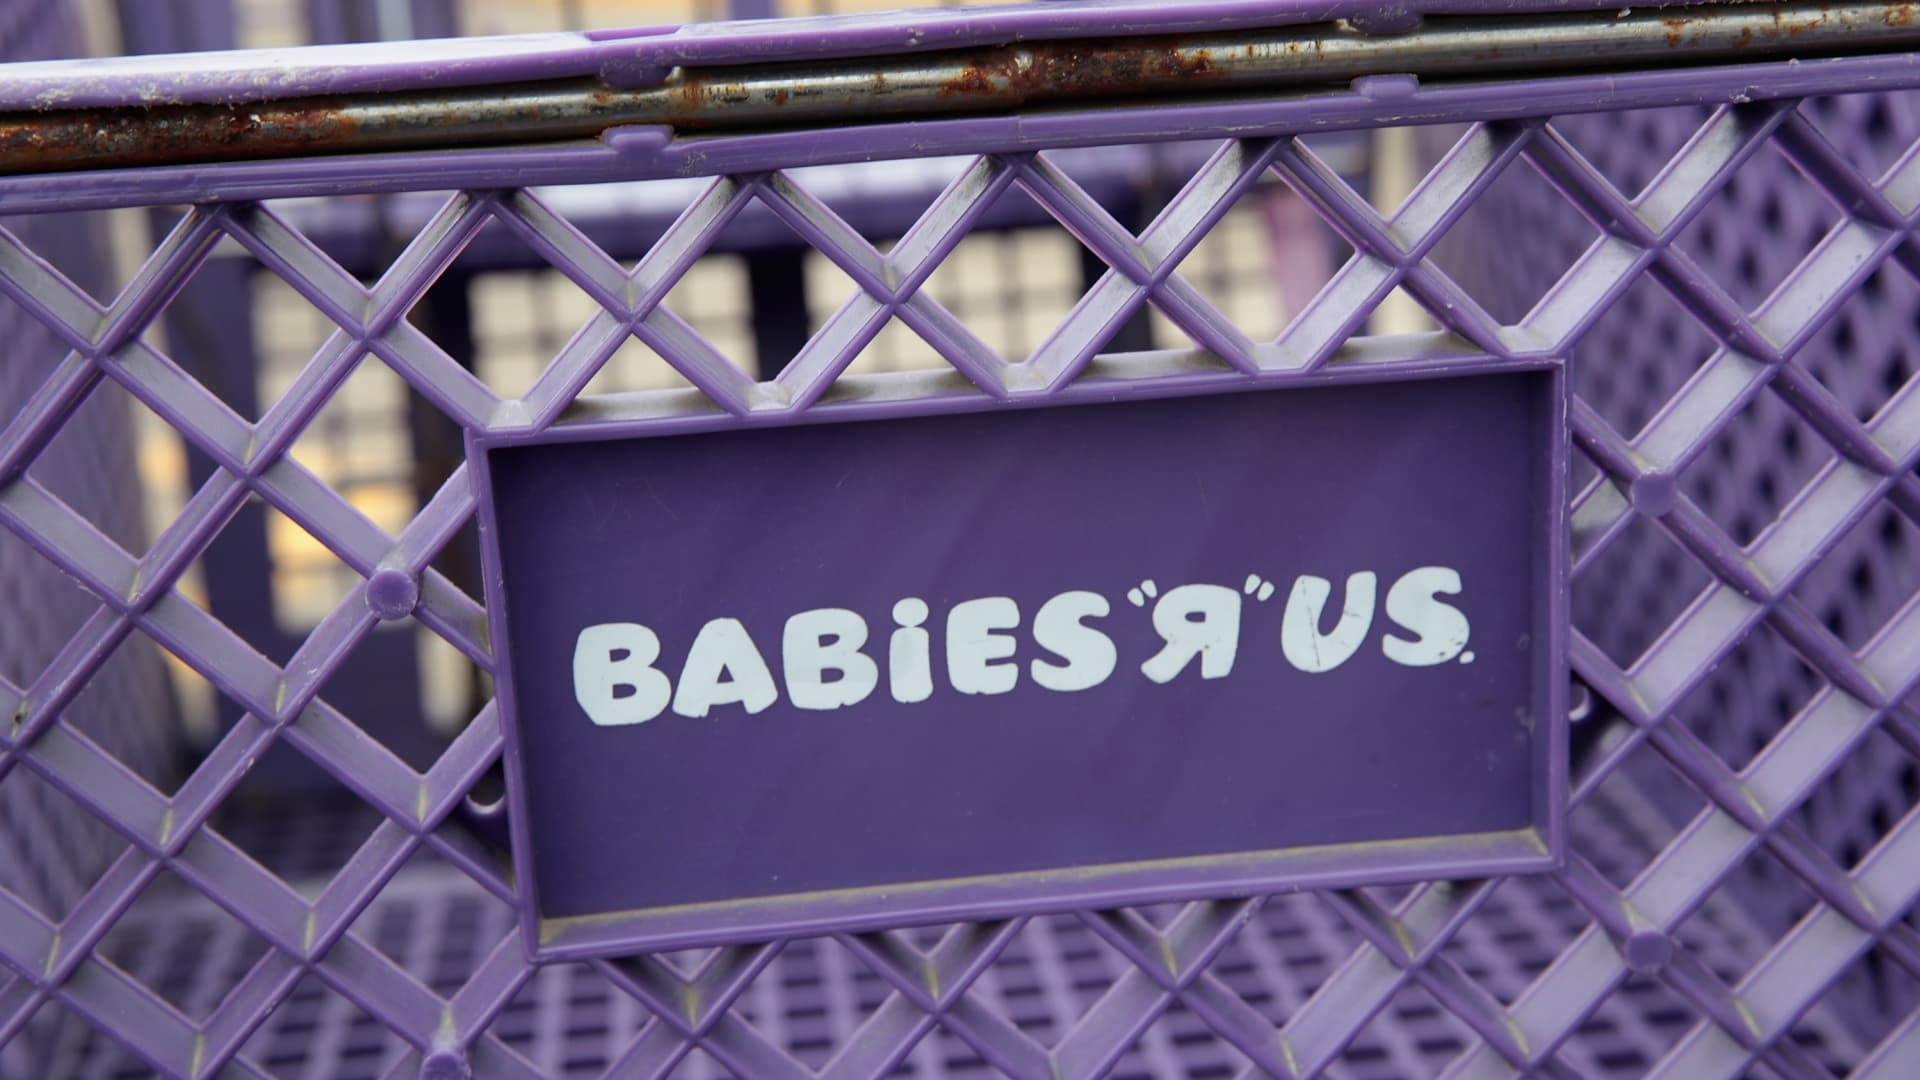 Babies R Us attempts comeback, plans to open store at American Dream mall in New Jersey